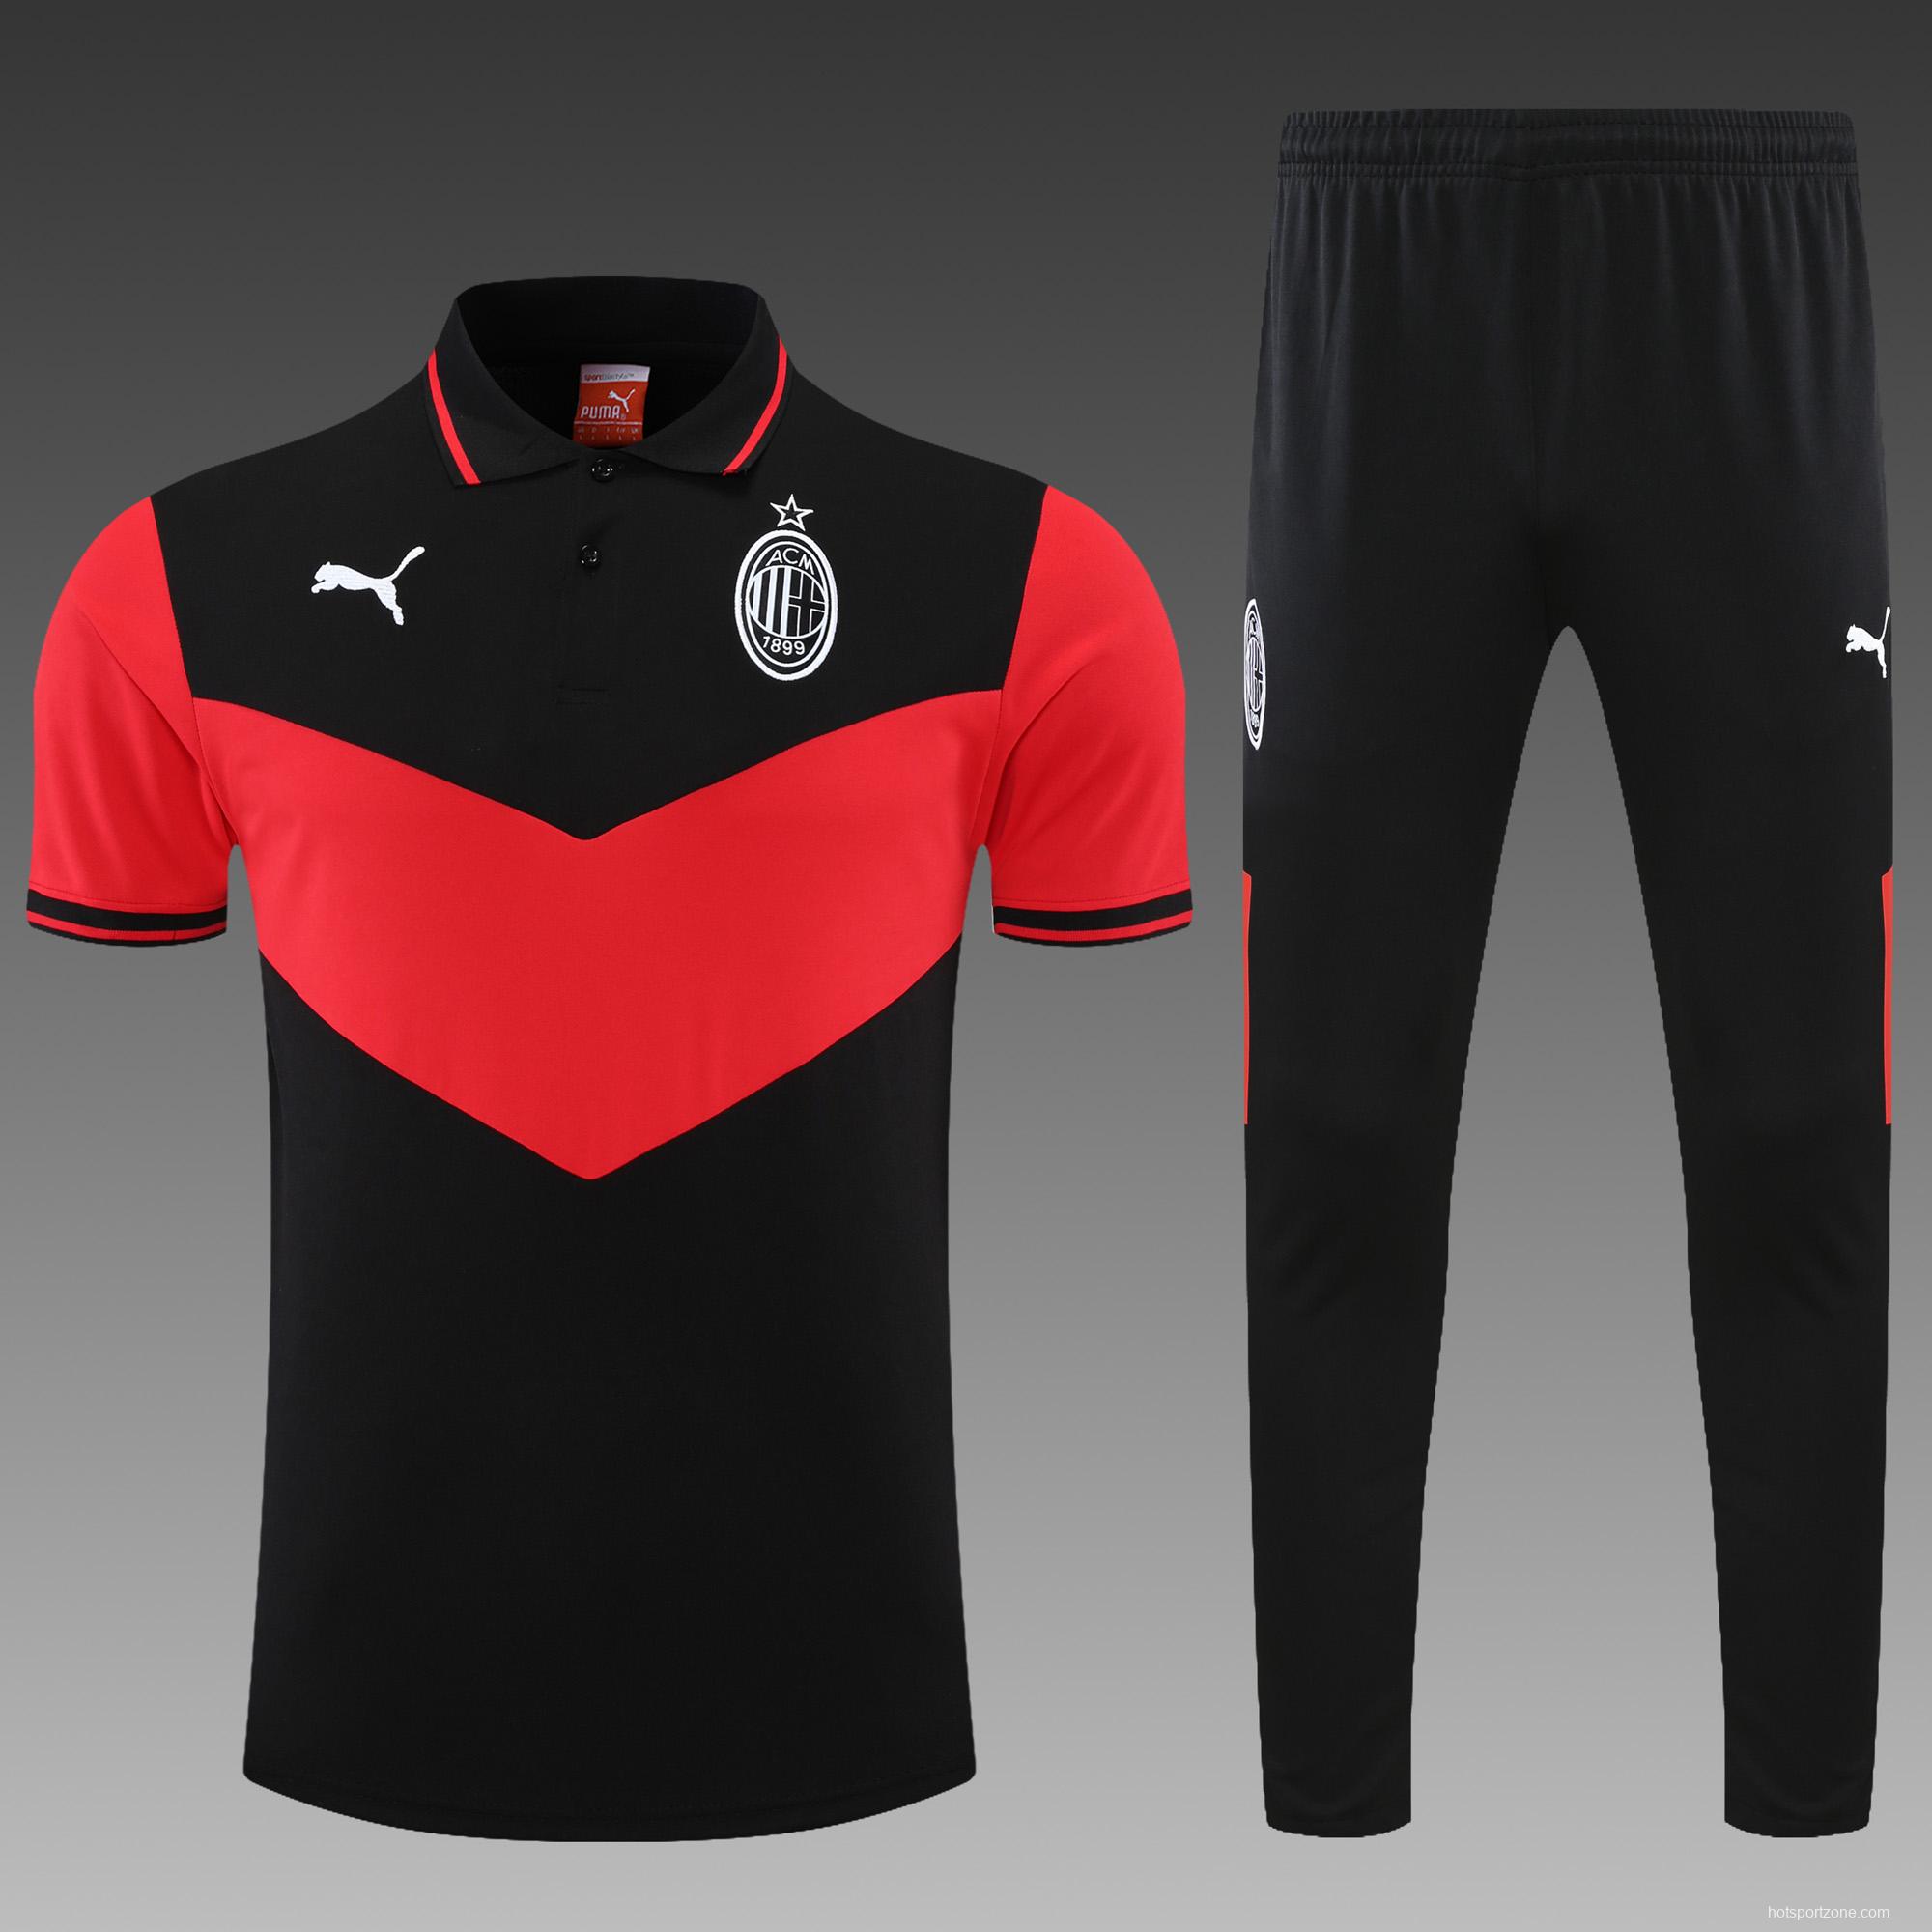 A.C. Milan POLO kit Black and Red(not supported to be sold separately)